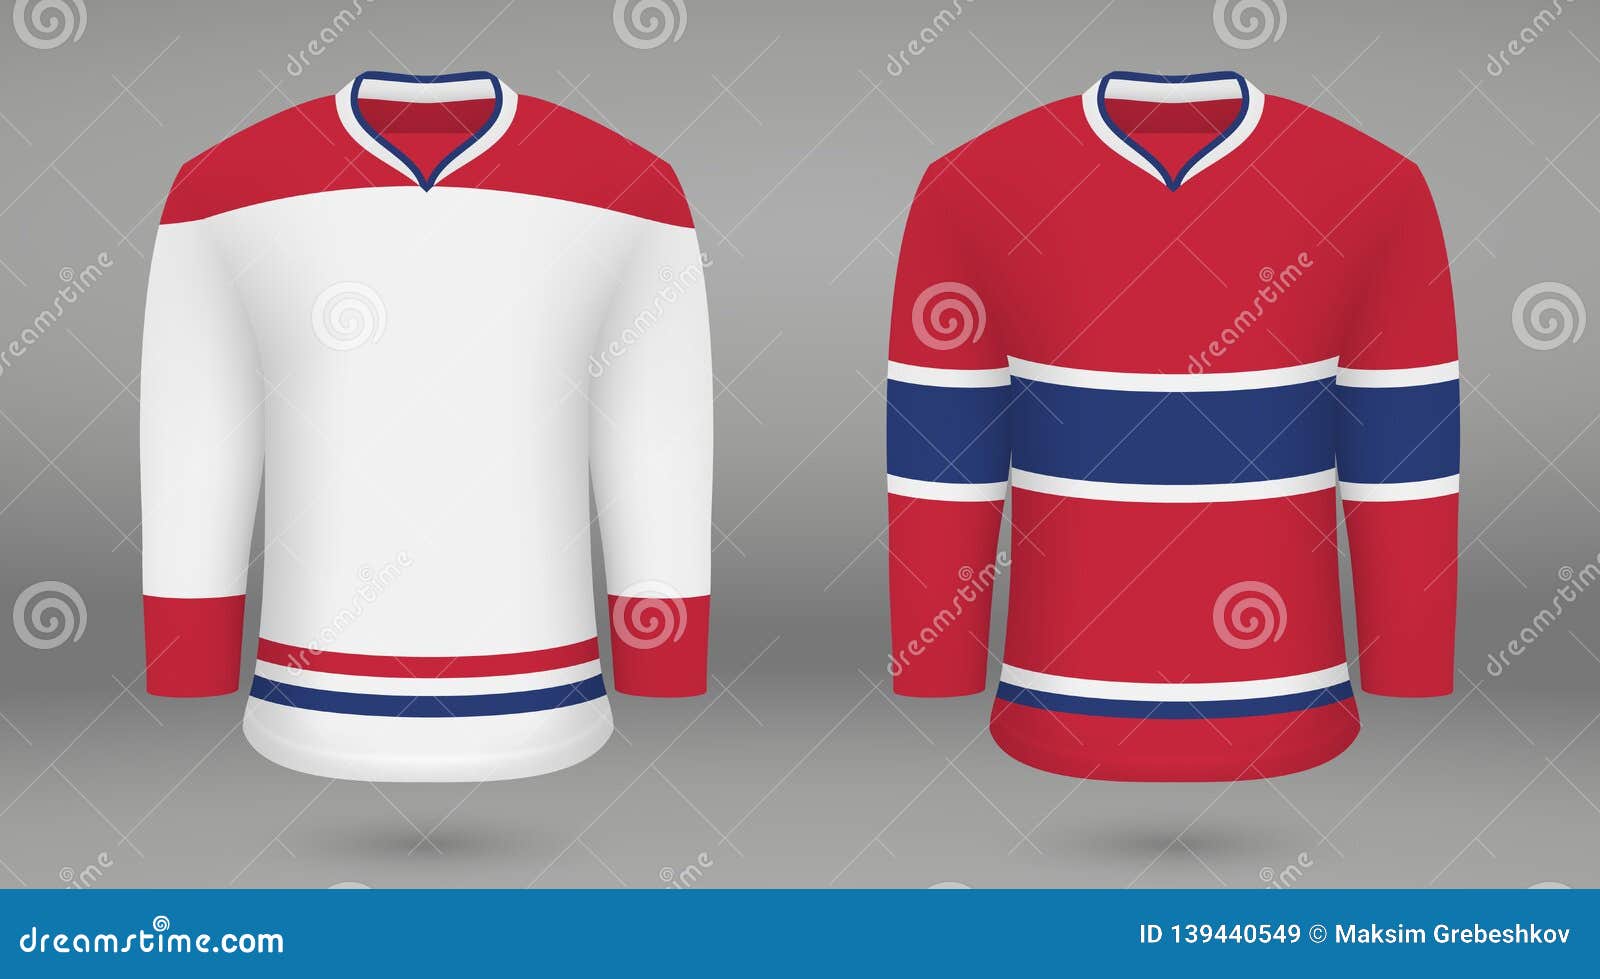 How to draw a ice hockey jersey (Montreal Canadiens NHL) 